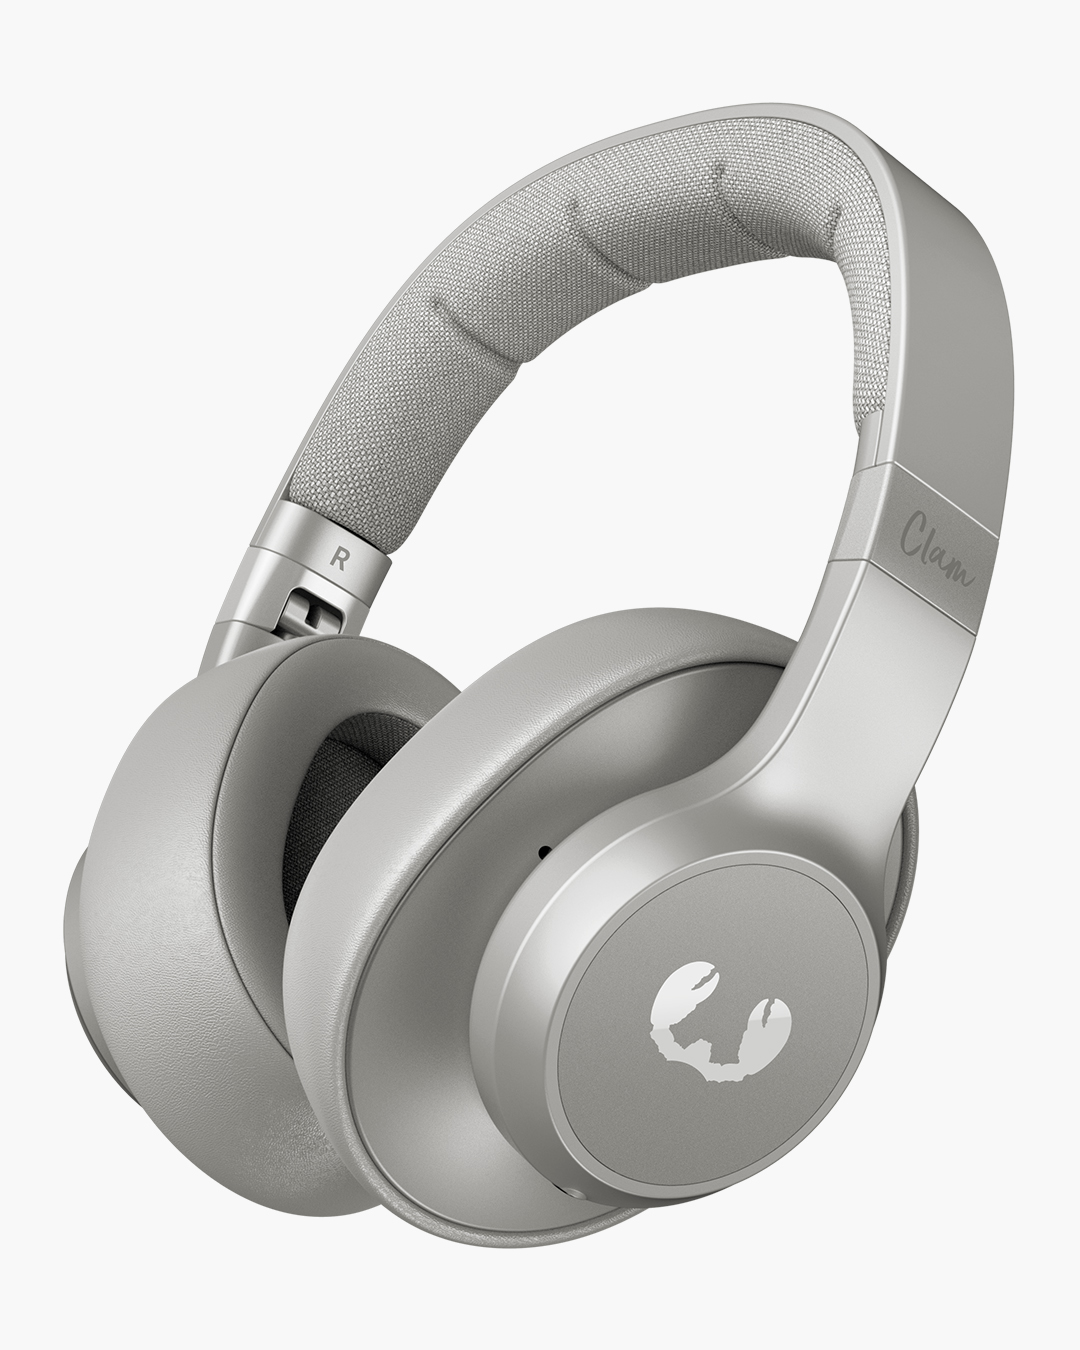 Fresh 'n Rebel - Clam ANC - Wireless over-ear headphones with active noise cancelling - Ice Grey